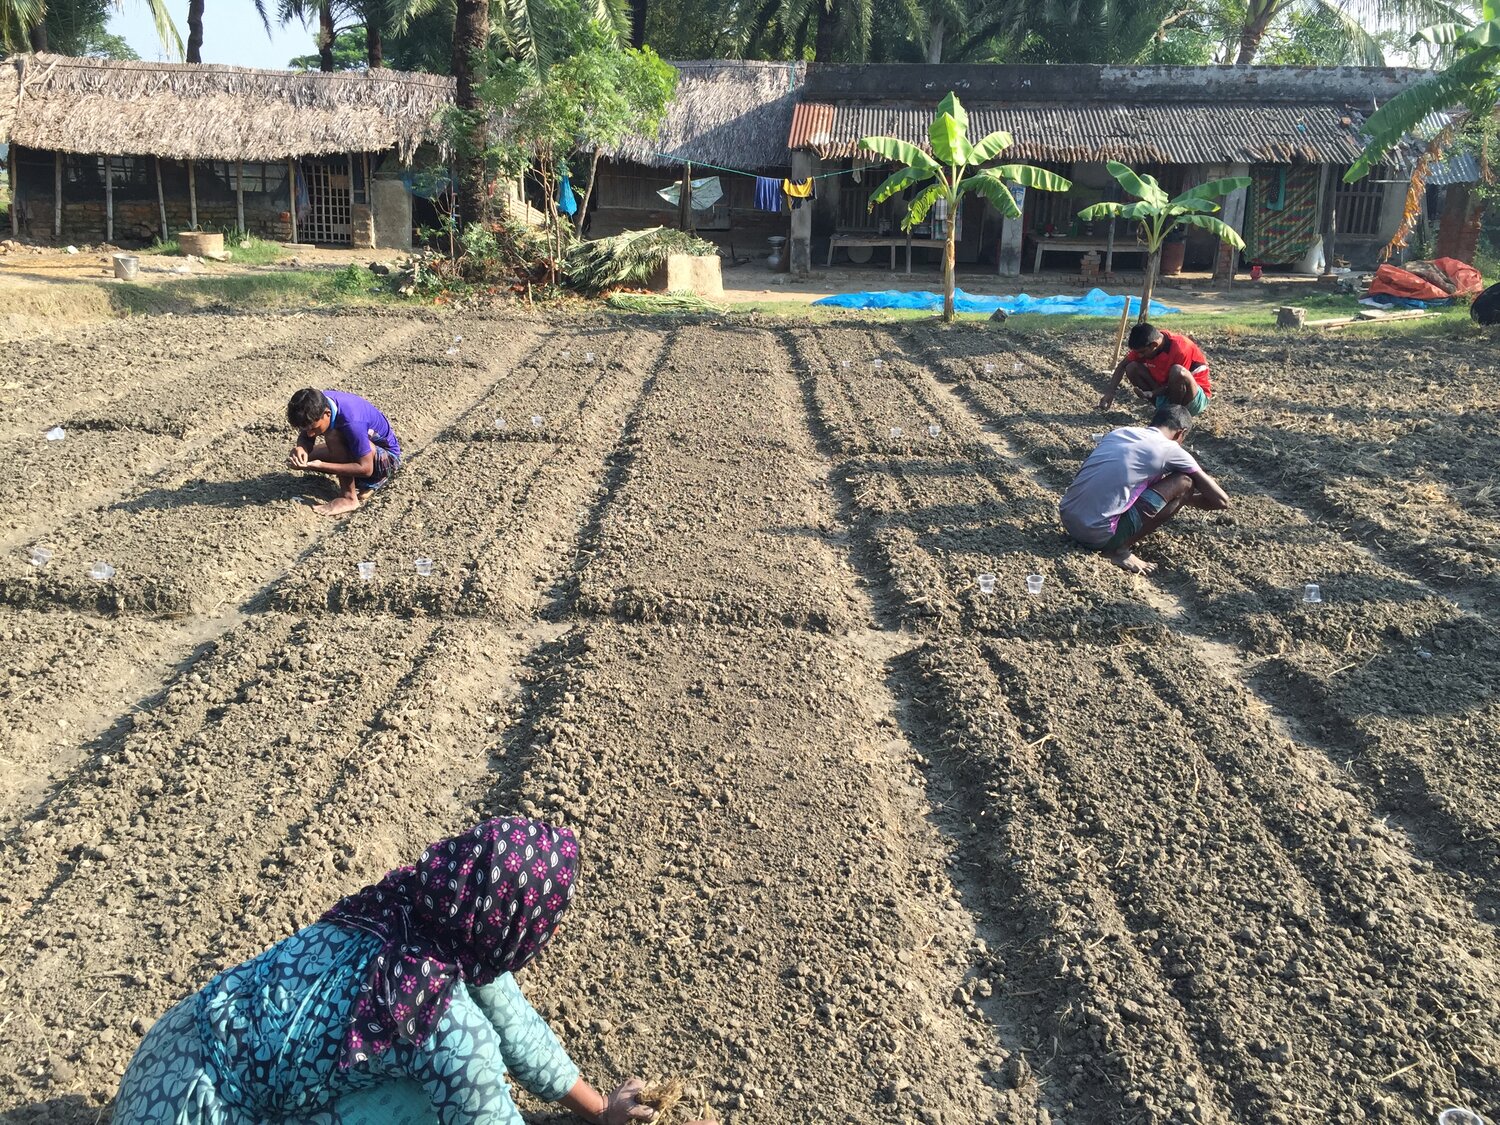 Workers sowing carrot seeds at a field site